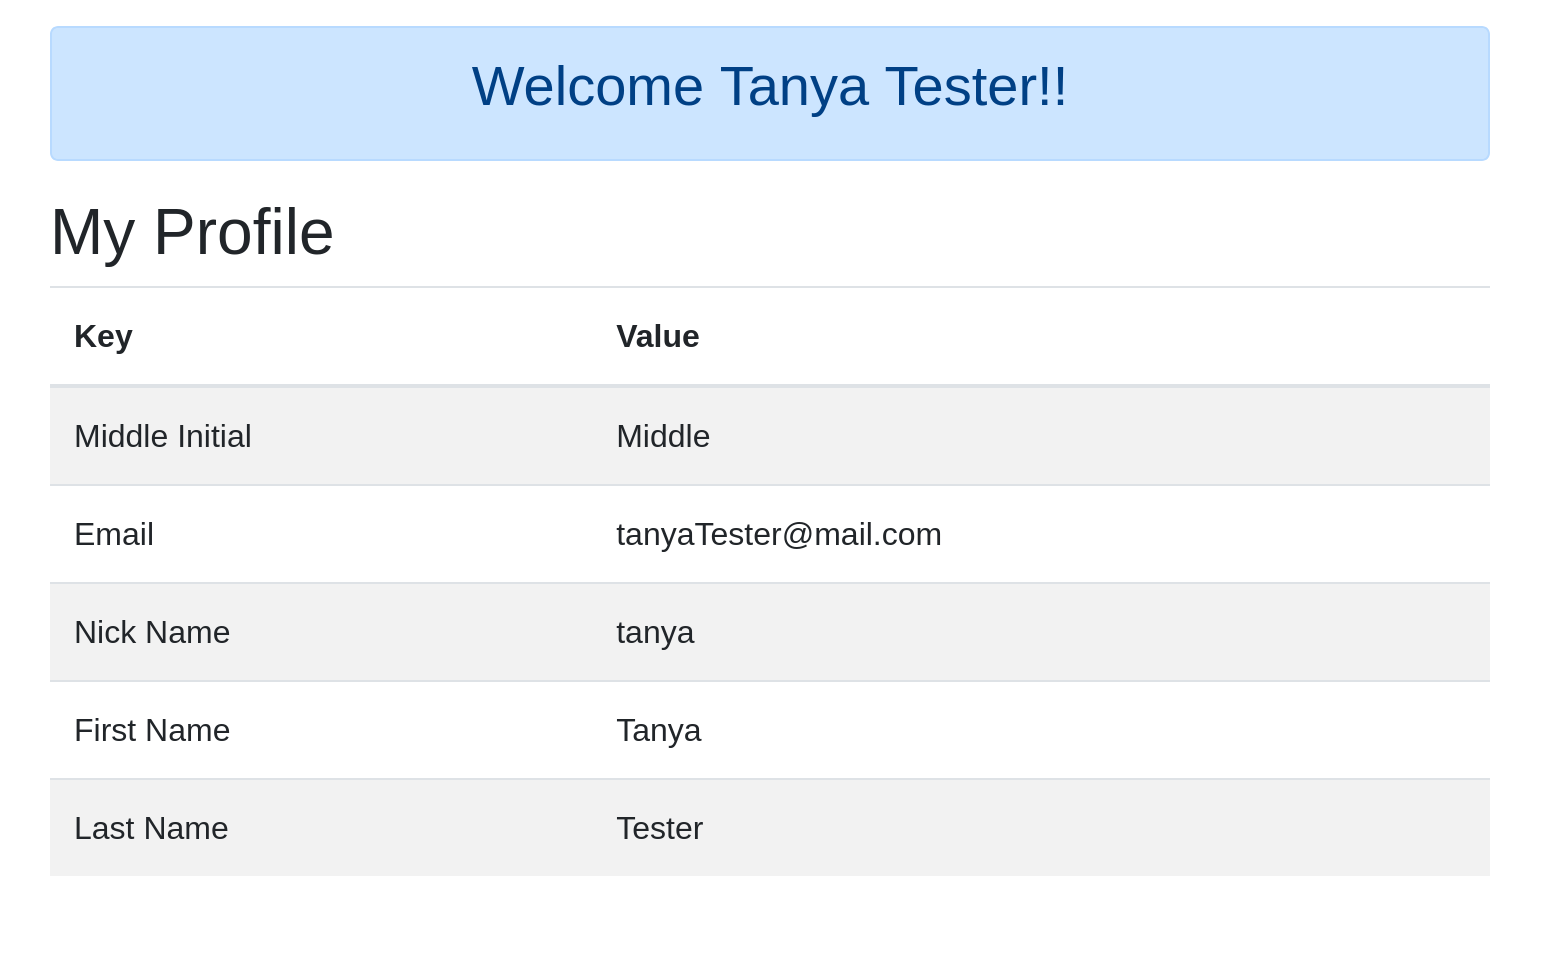 Screen shot, Amanda Tester profile without email scope